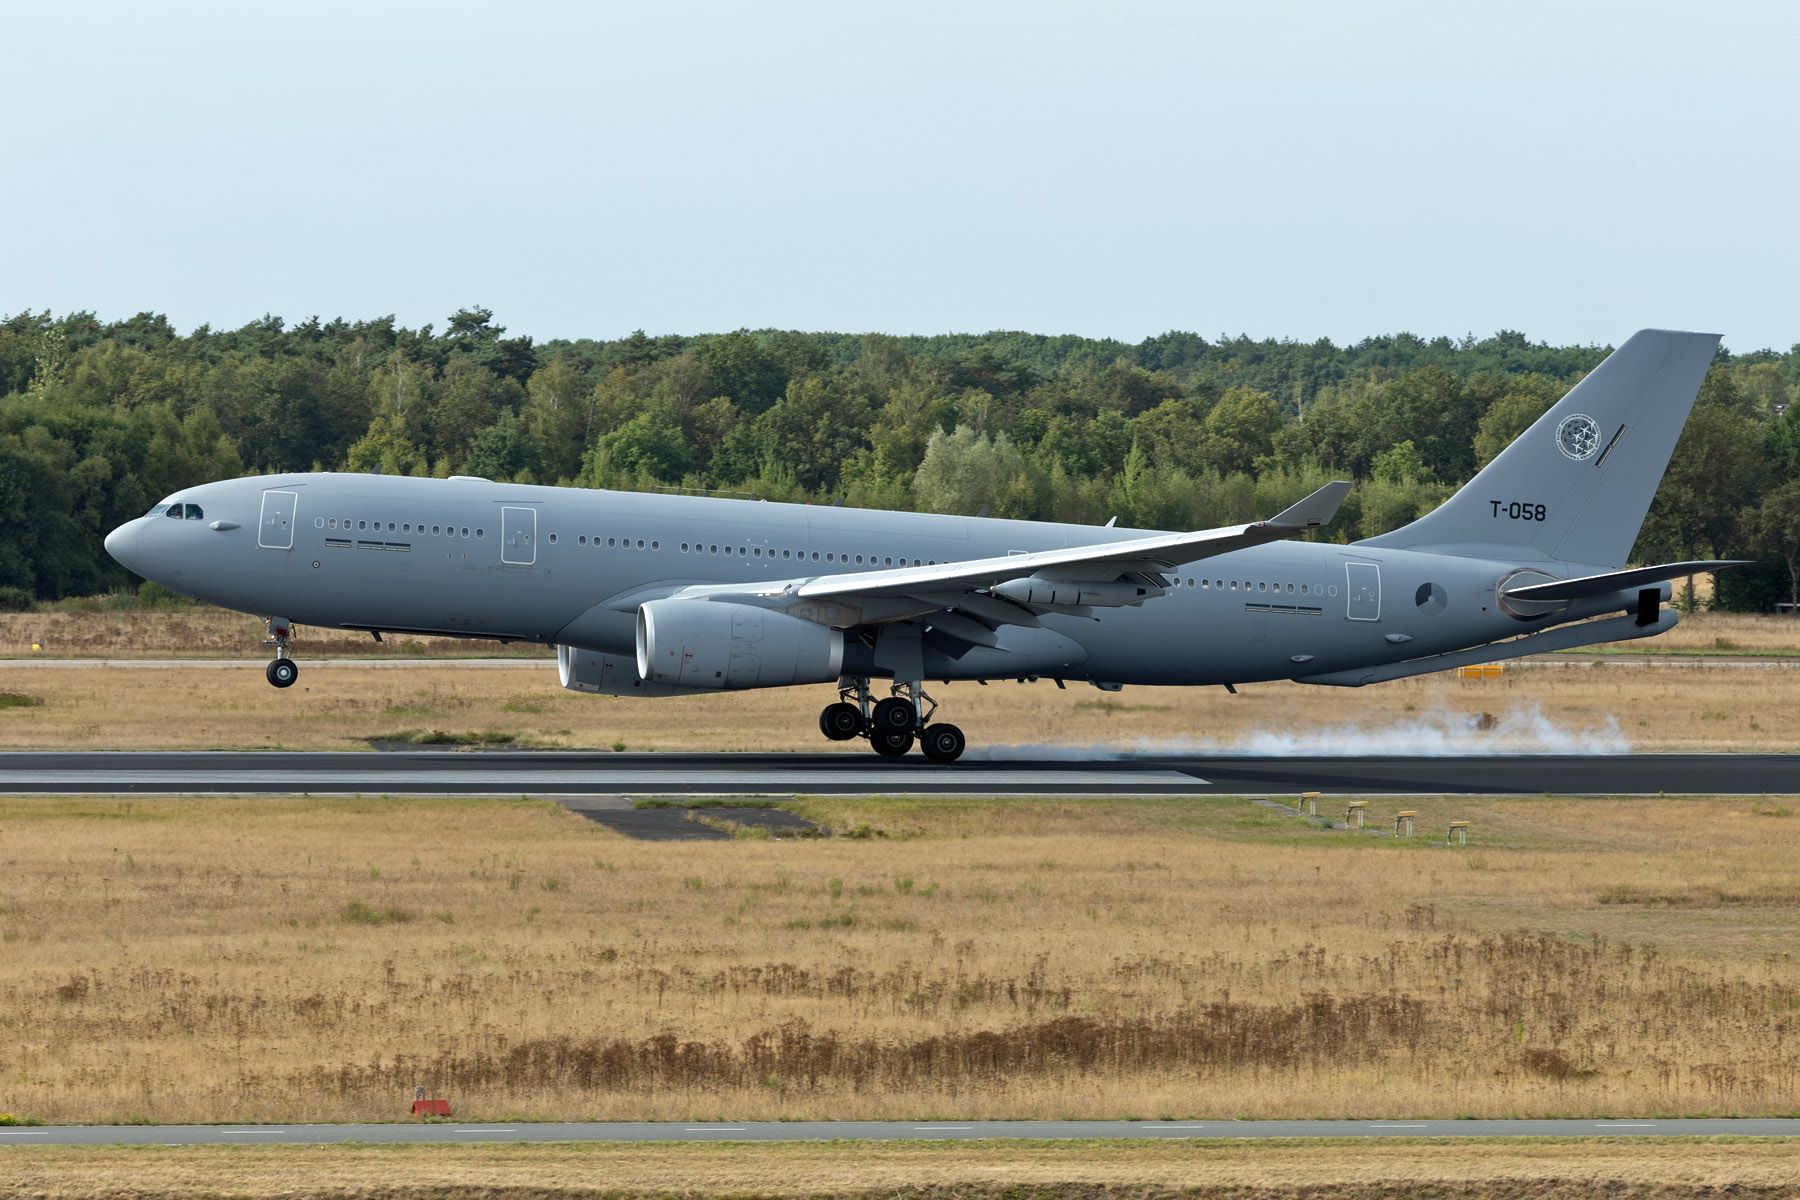 Airbus A330-200 (T058)